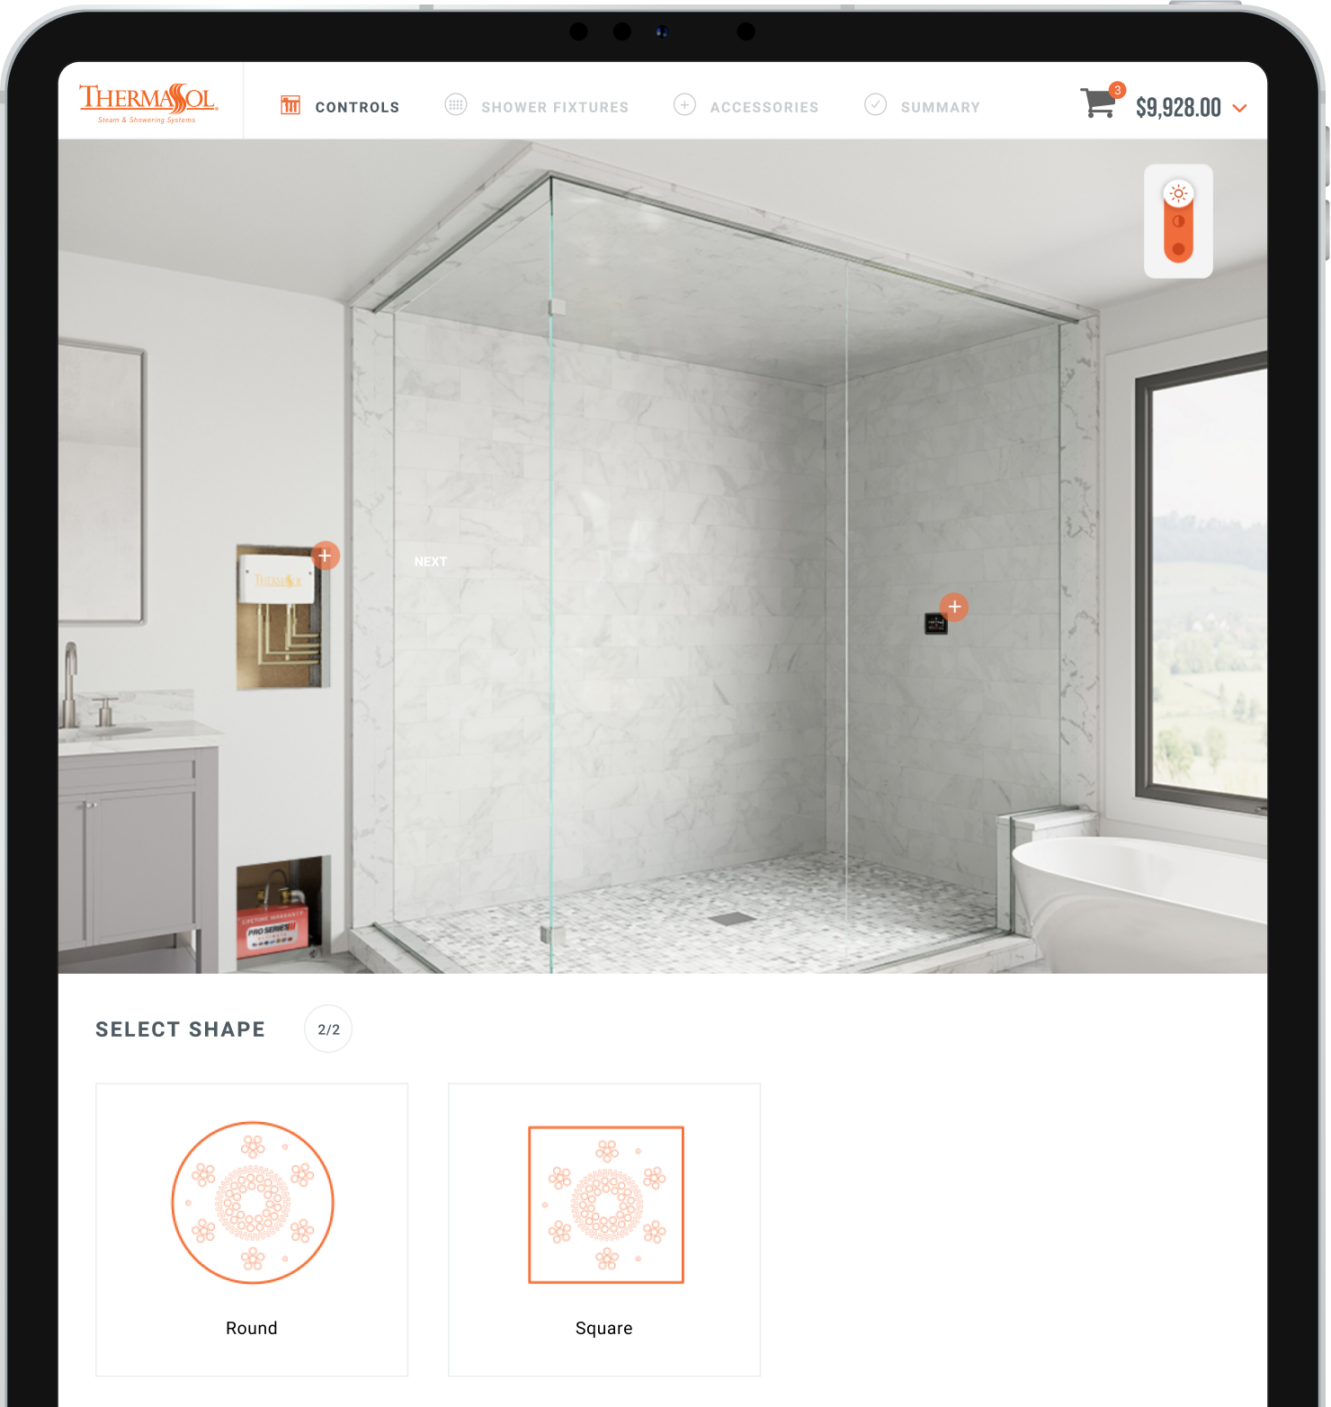 A shower configurator tool on ThermaSol's ecommerce website, developed by Wanted For Nothing agency